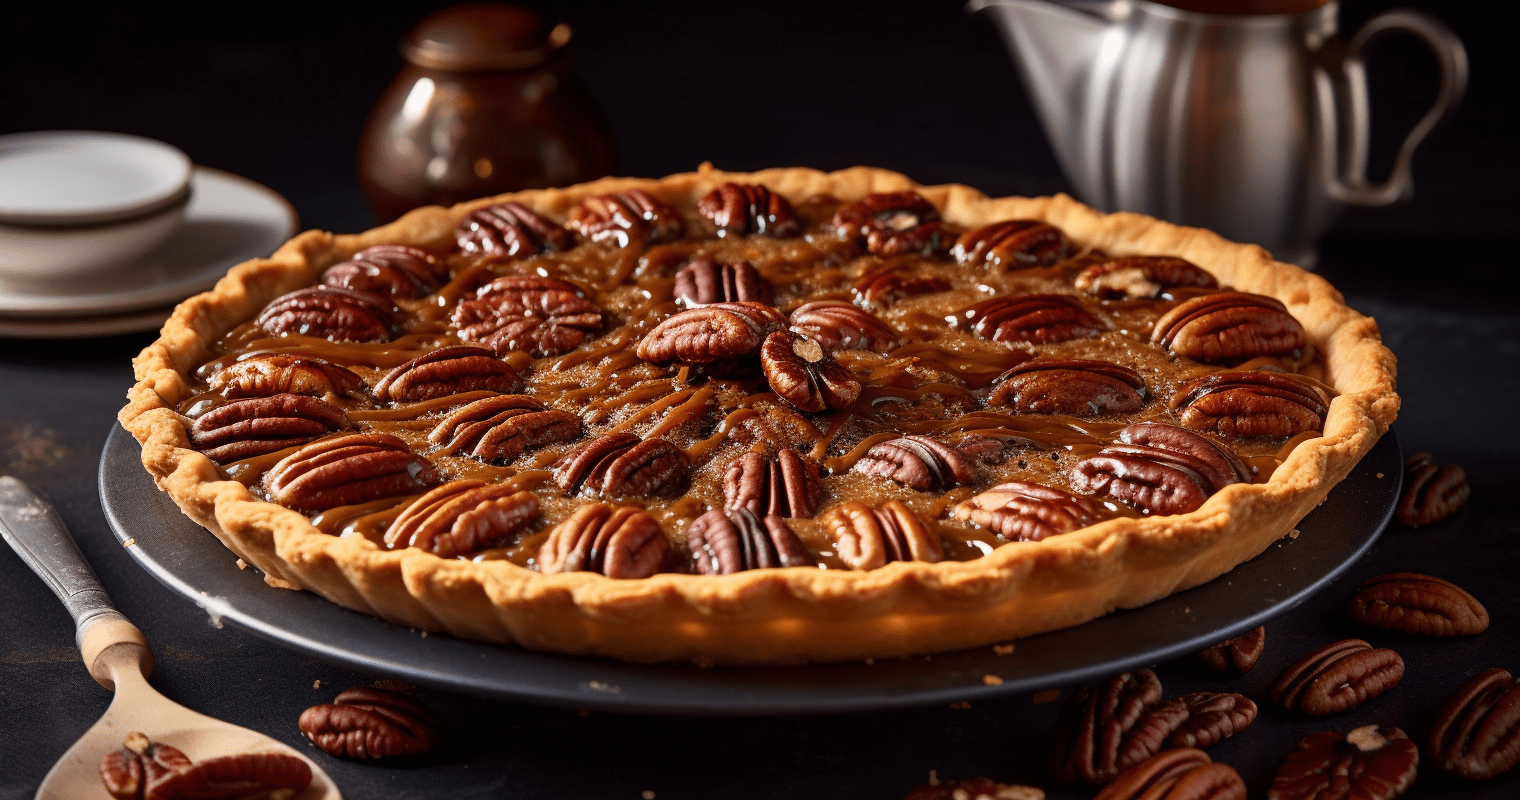 The Irresistible Pecan Pie Recipe: A Classic Dessert for the Holidays